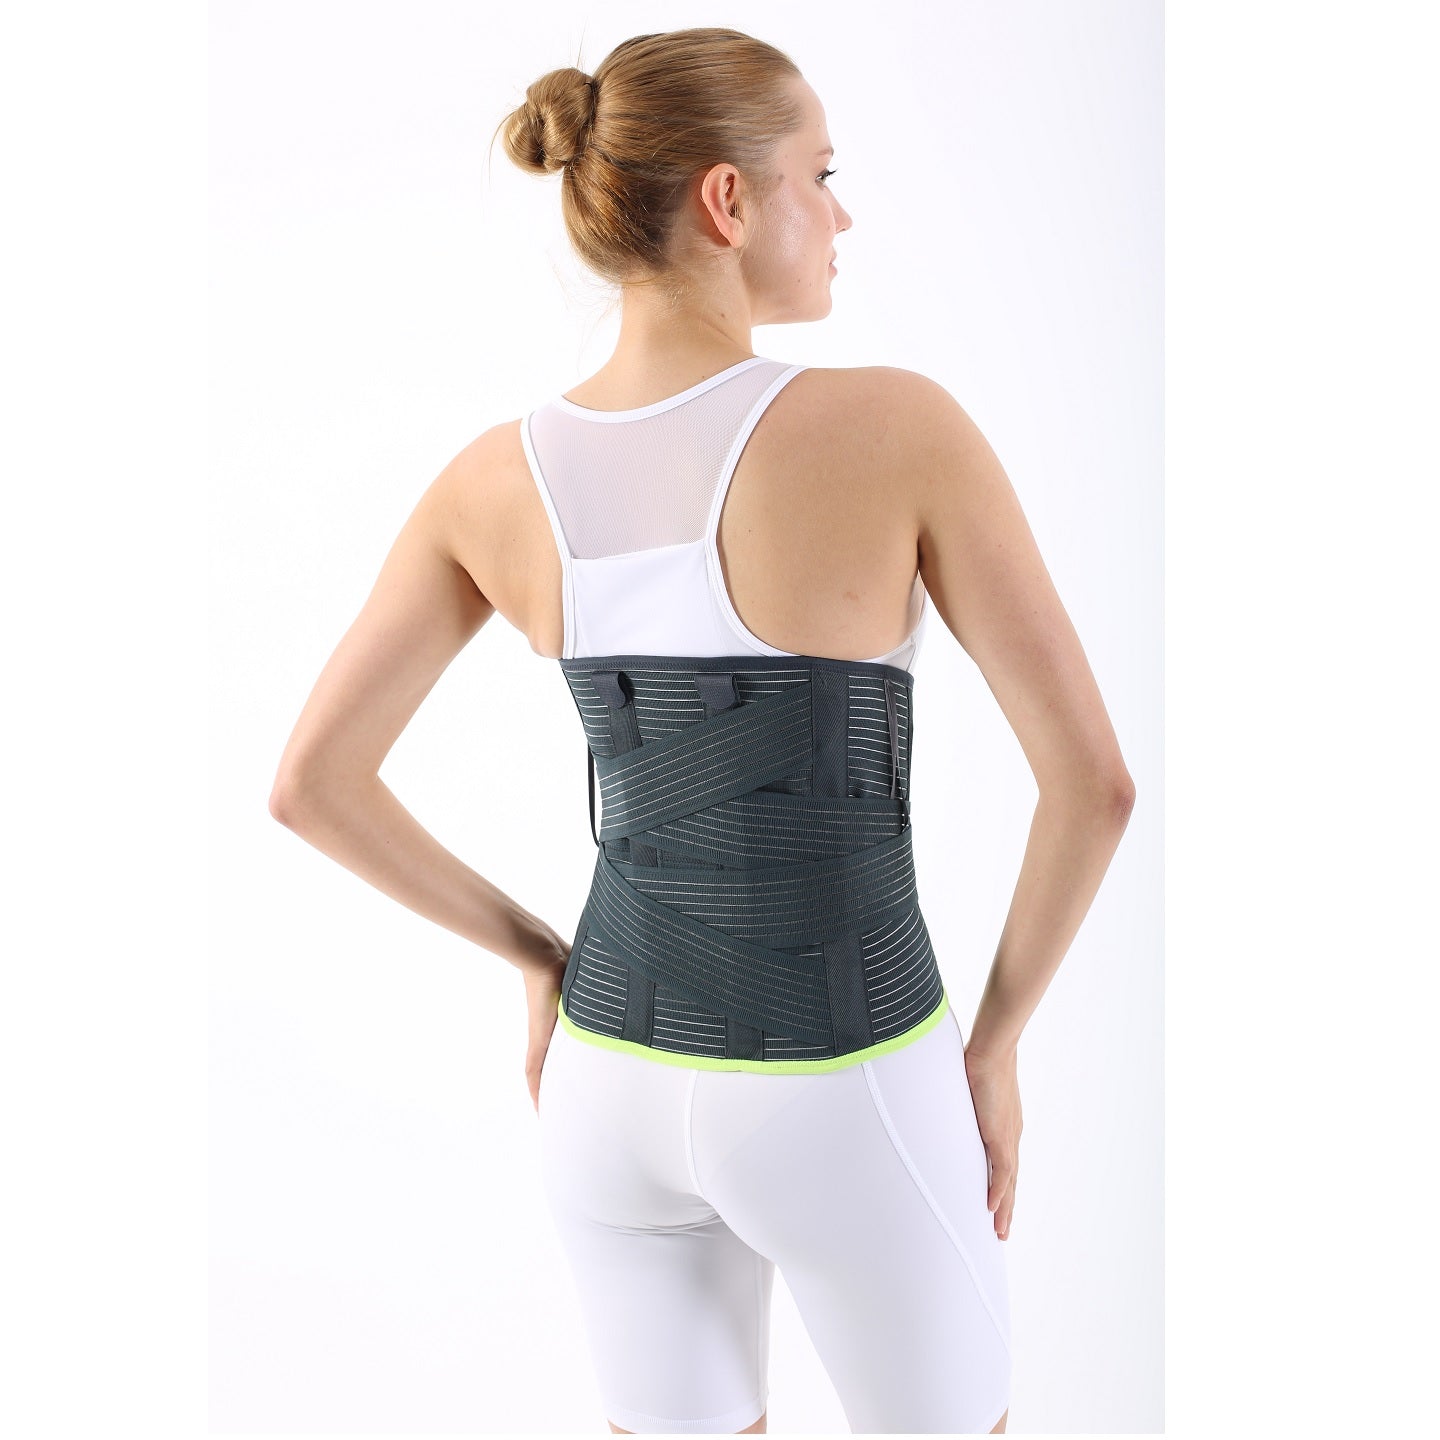 Lumbosacral Corset - 32 cm - One Size Fits All